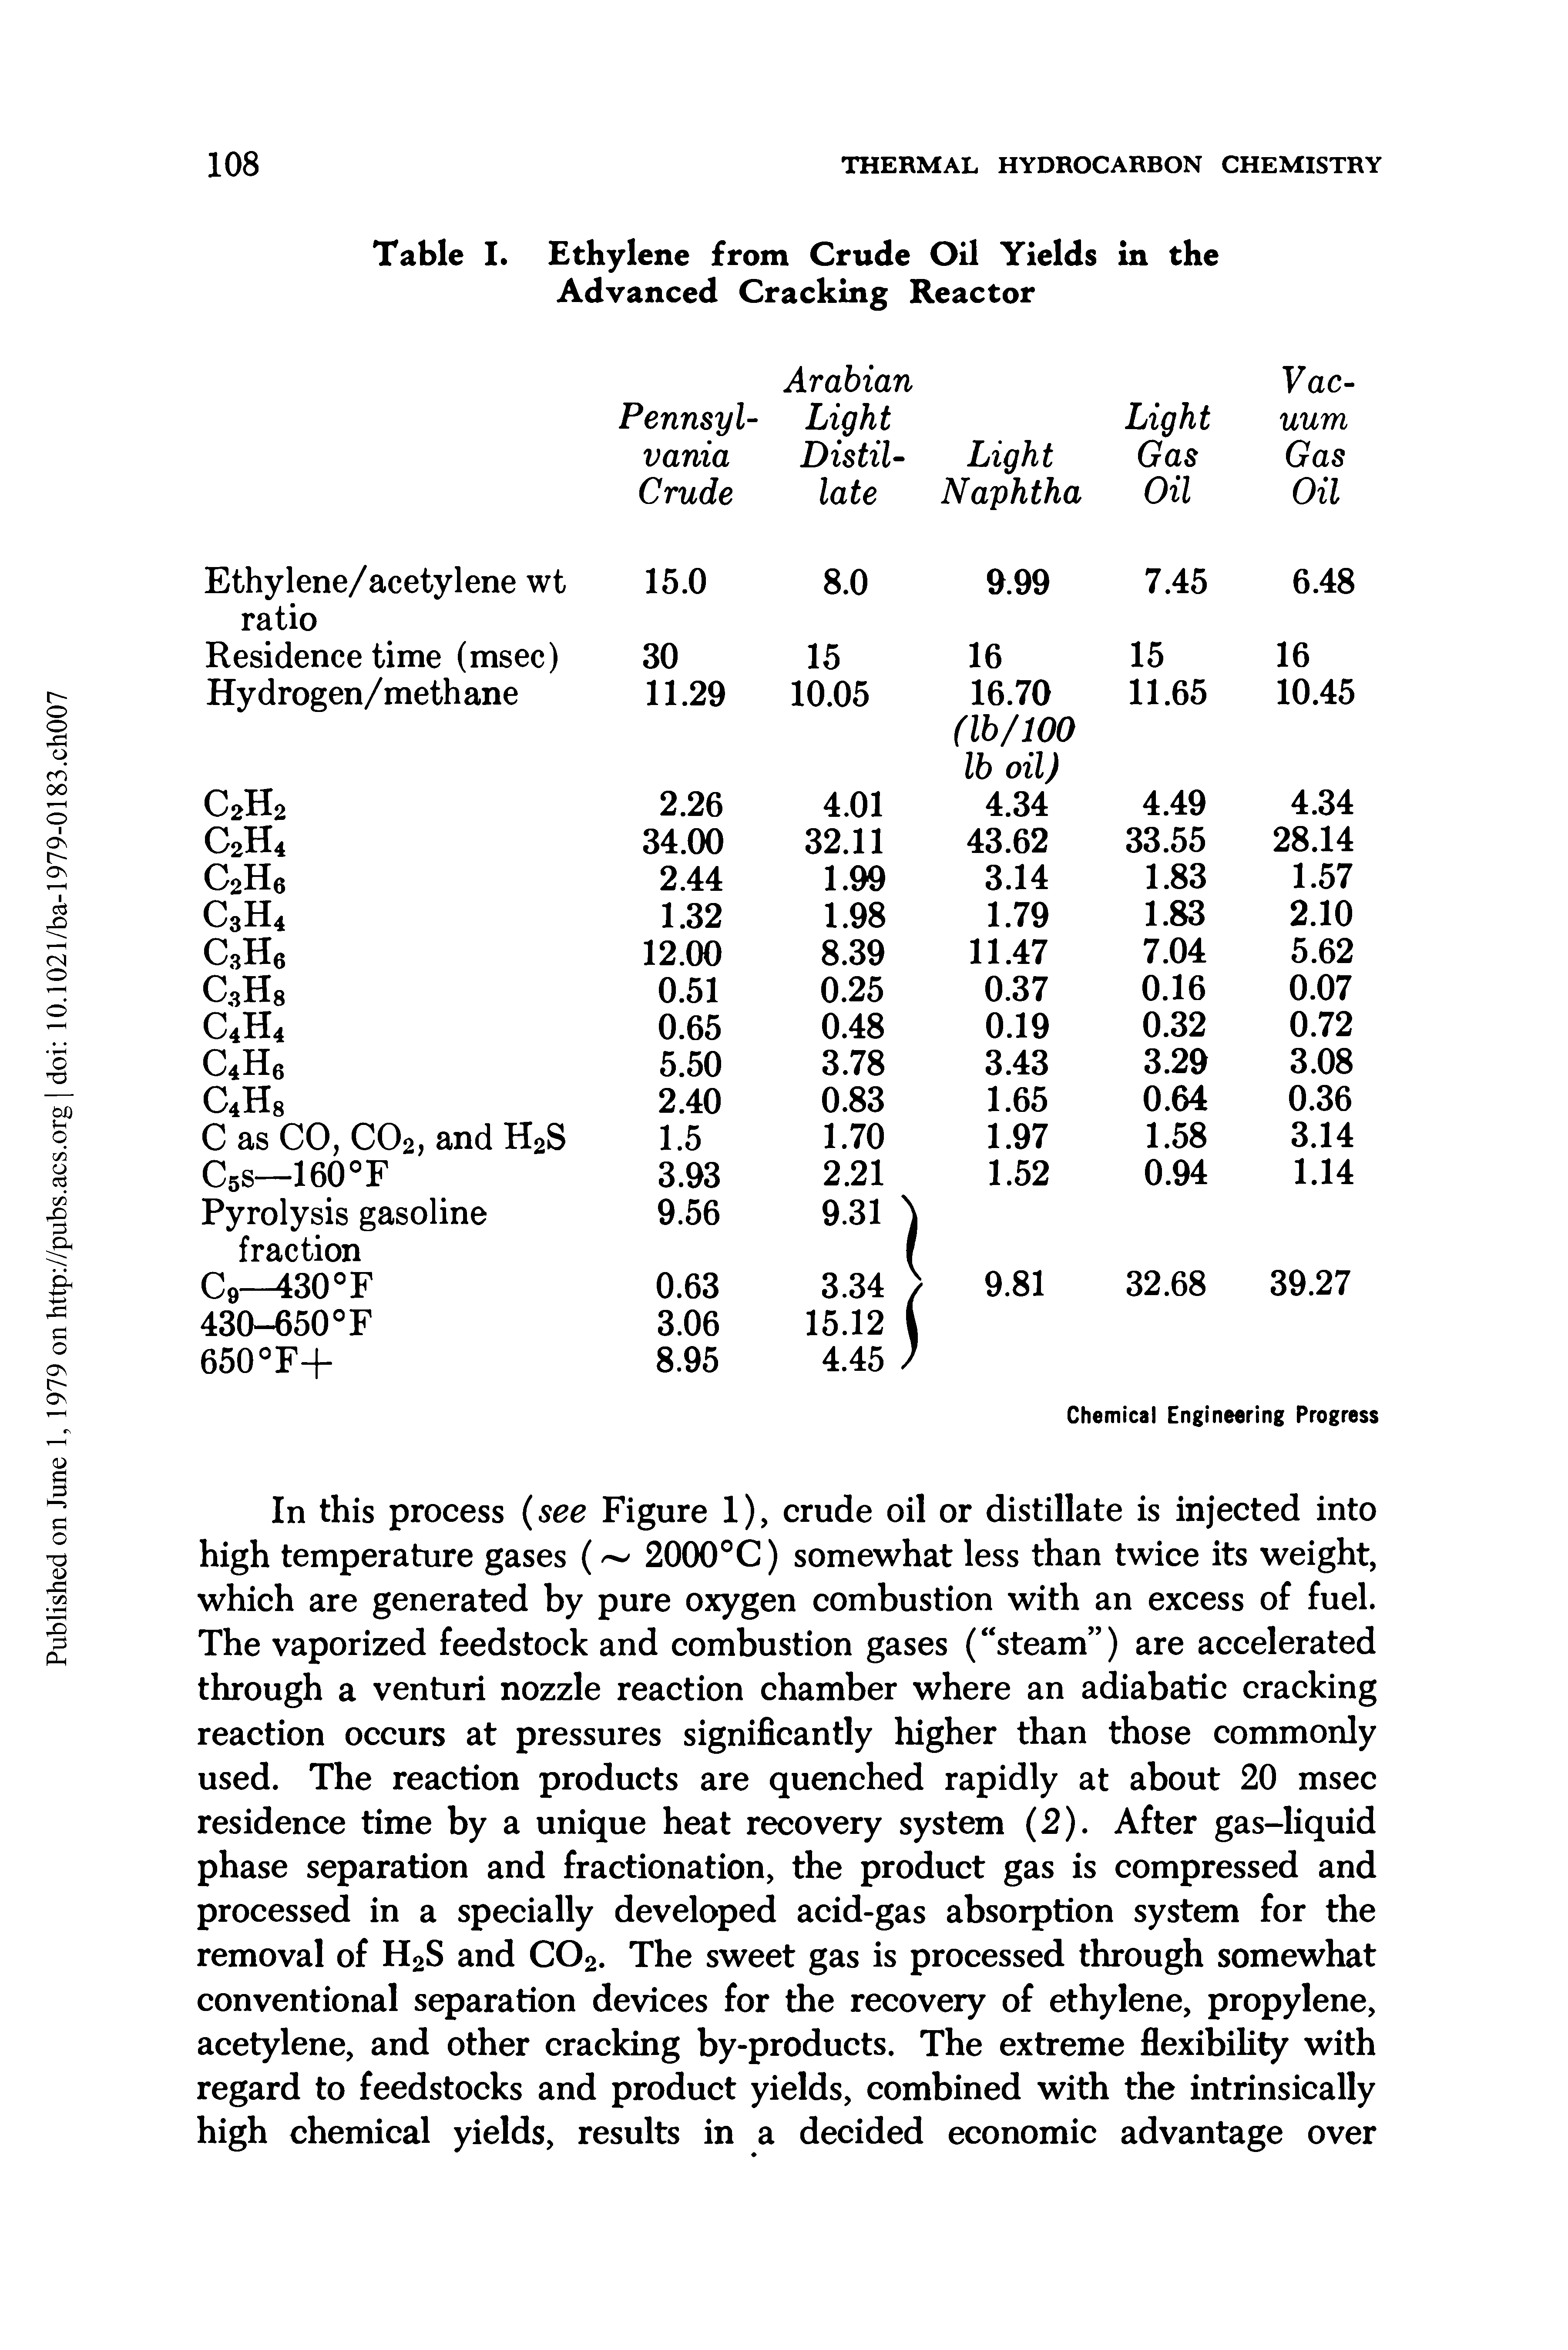 Table I. Ethylene from Crude Oil Yields in the Advanced Cracking Reactor...